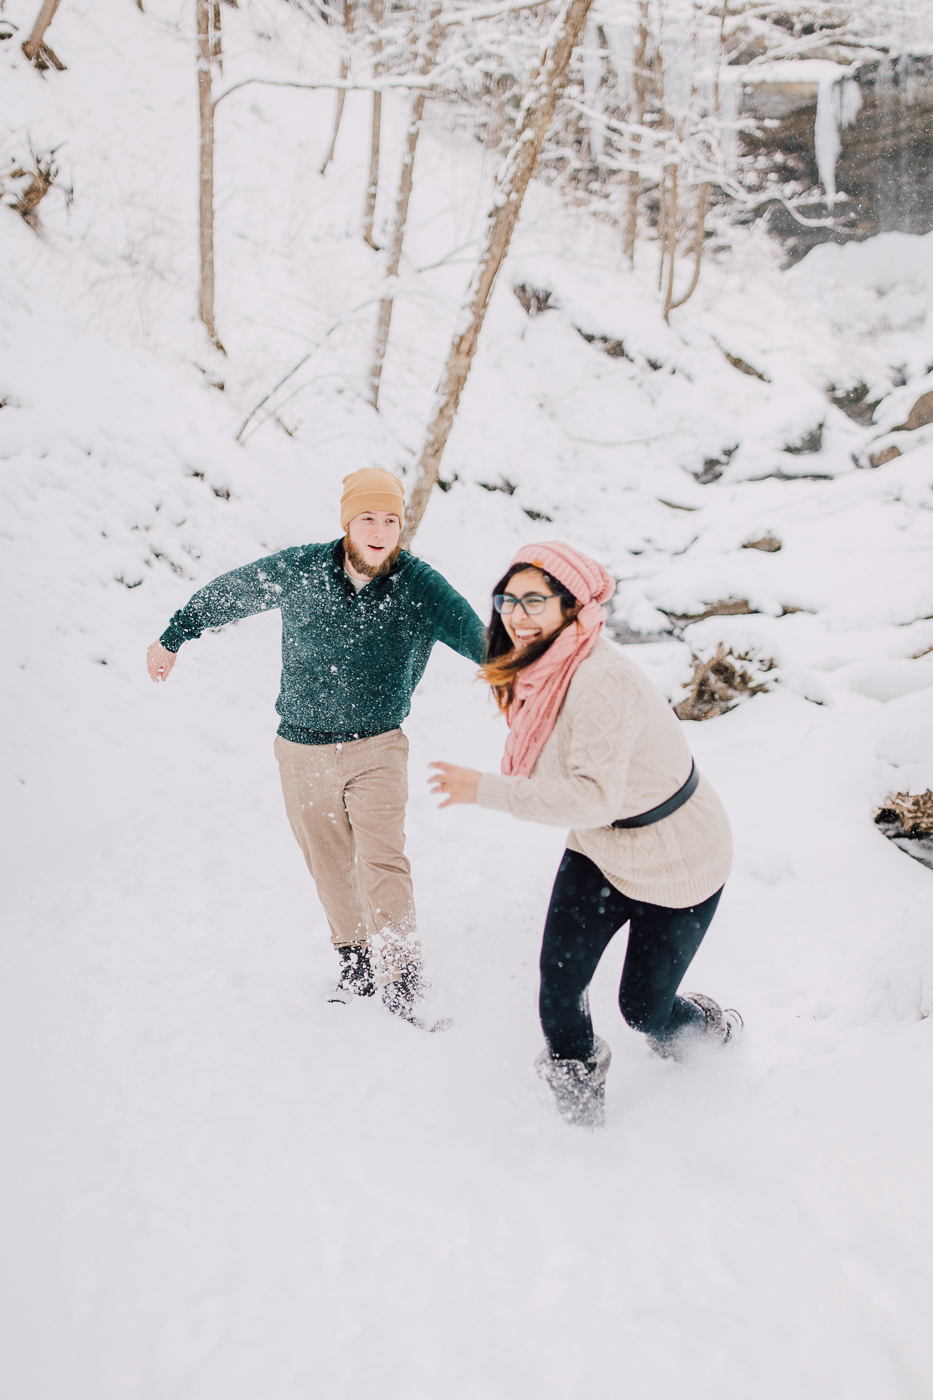  Engaged couple has a snowball fight during their adventure photoshoot at Tinker Falls in winter 